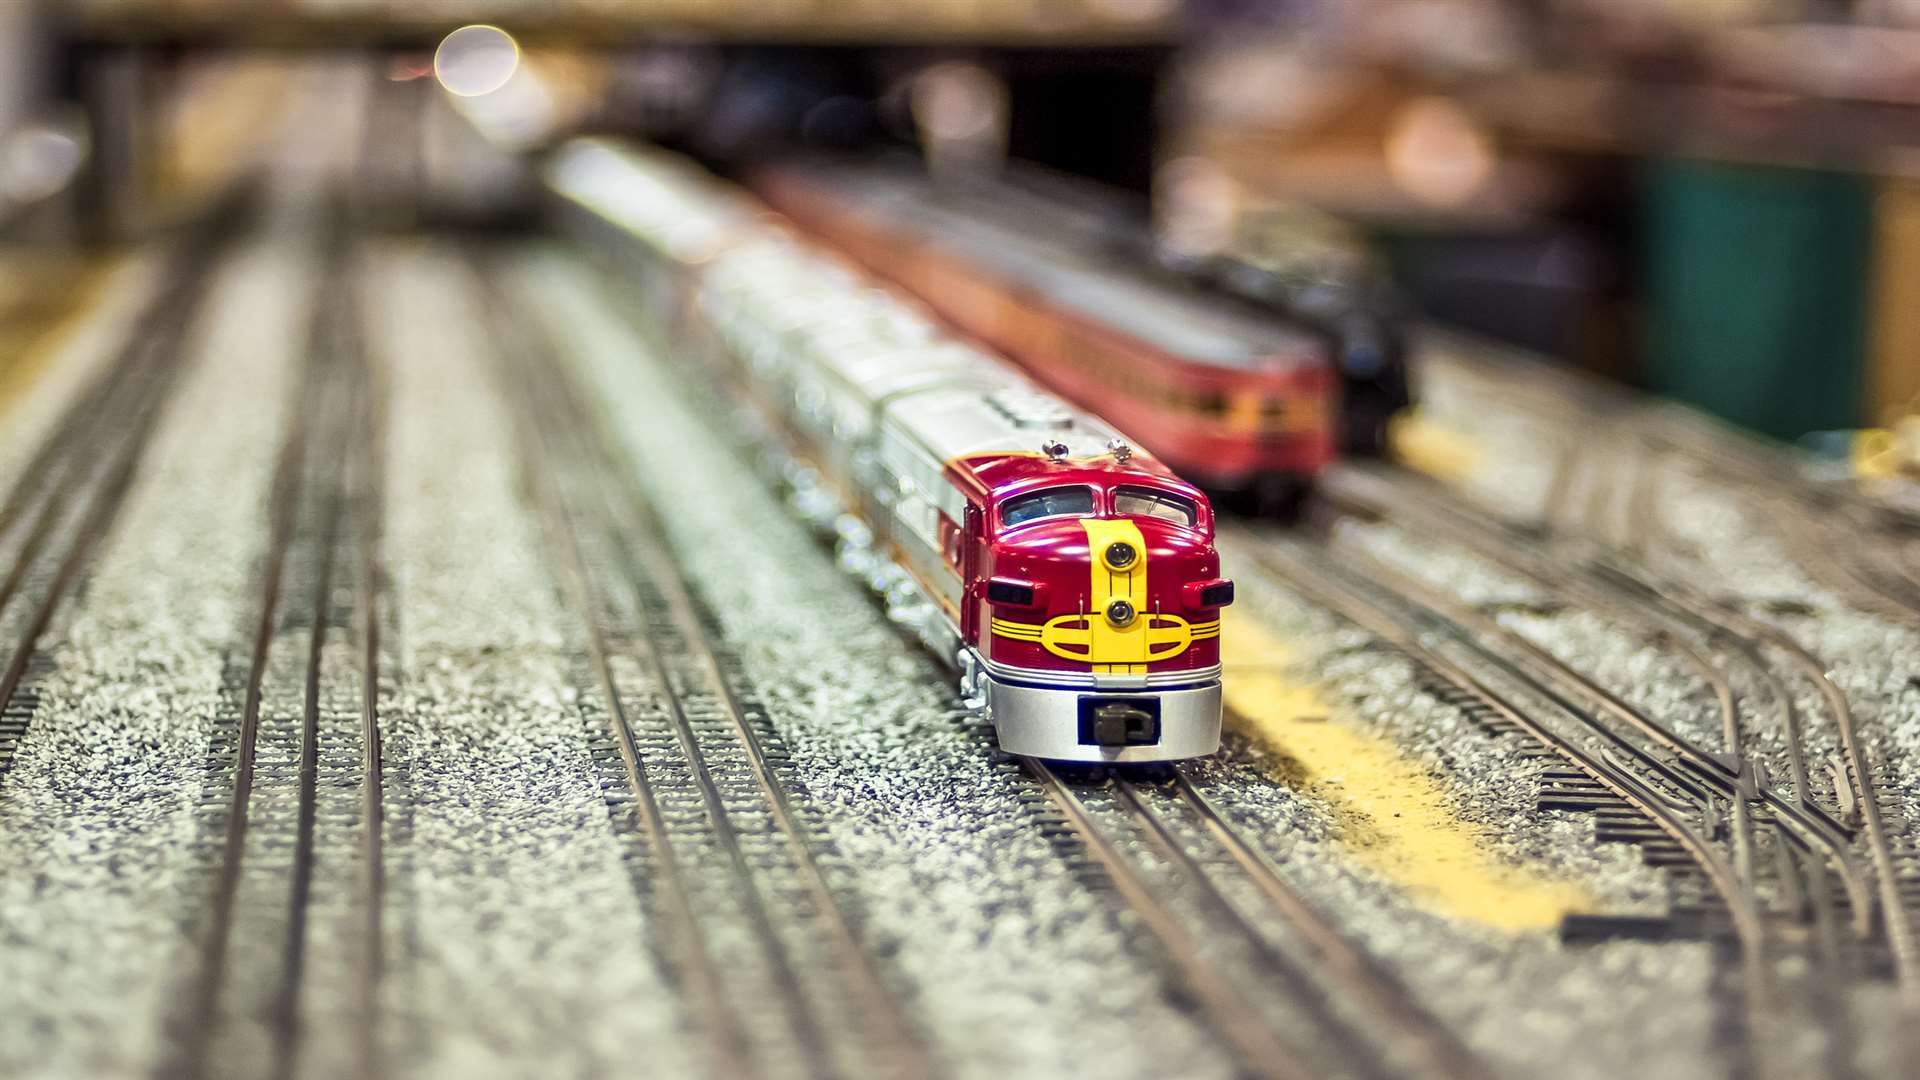 The model railway exhibition runs this weekend